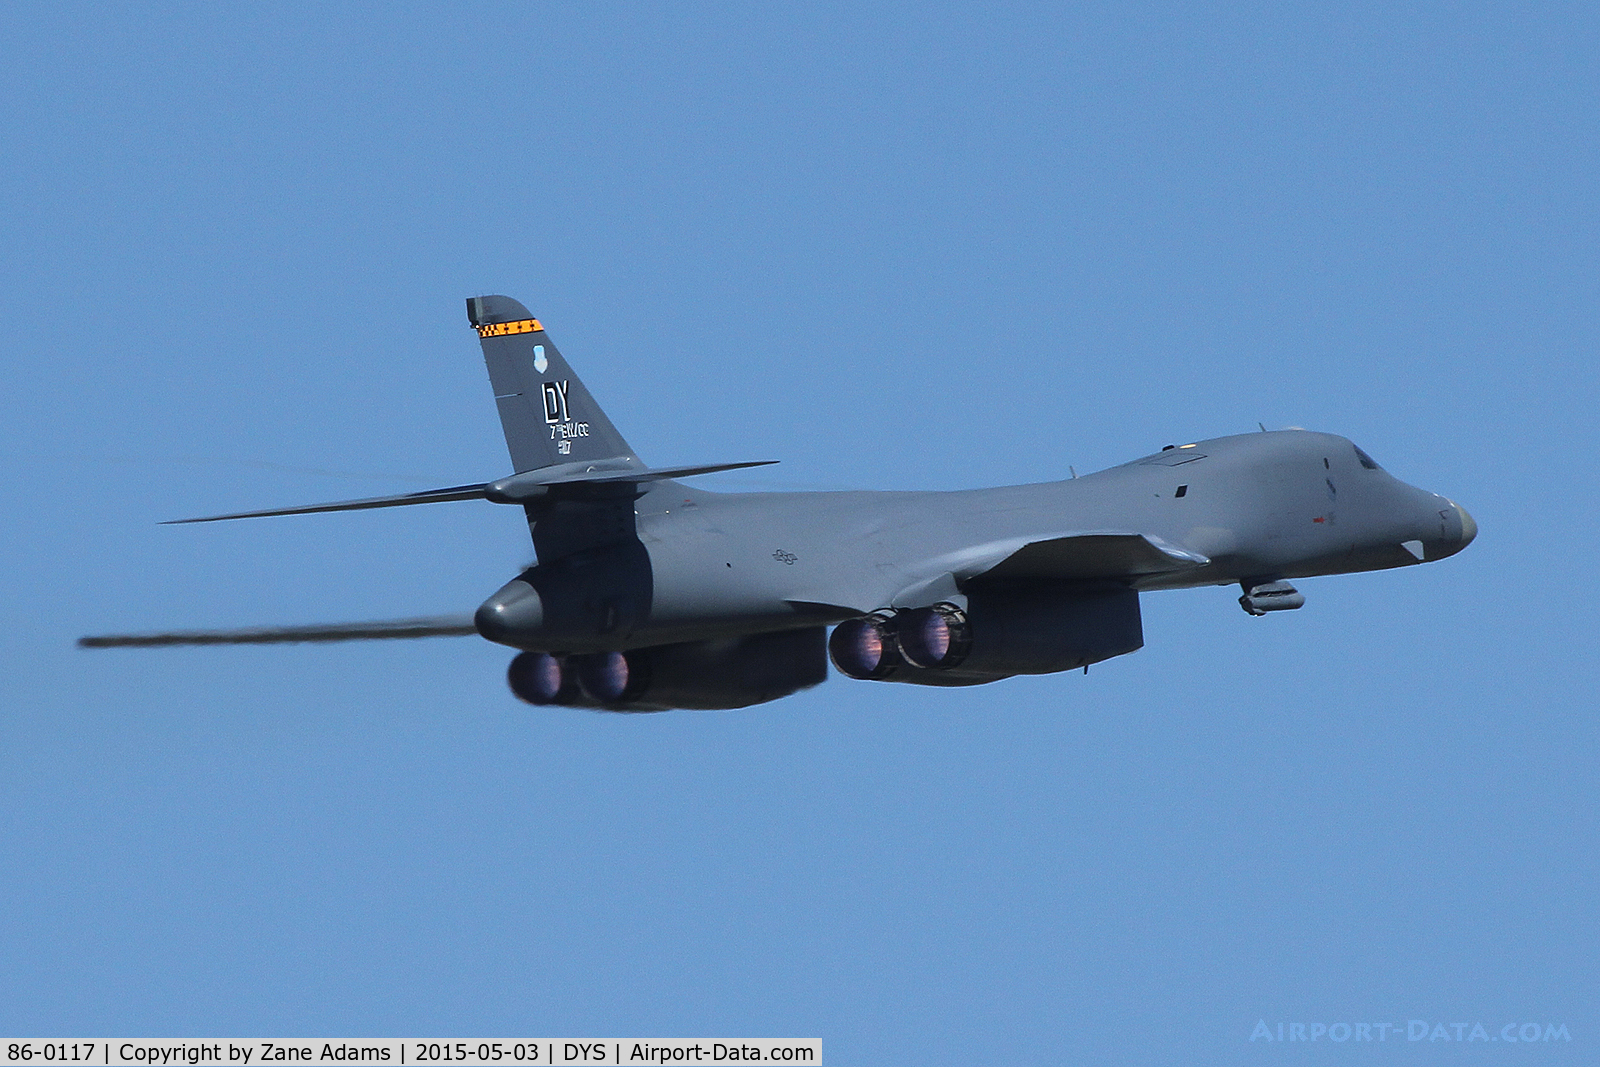 86-0117, 1986 Rockwell B-1B Lancer C/N 77, At the 2014 Big Country Airshow - Dyess AFB, TX